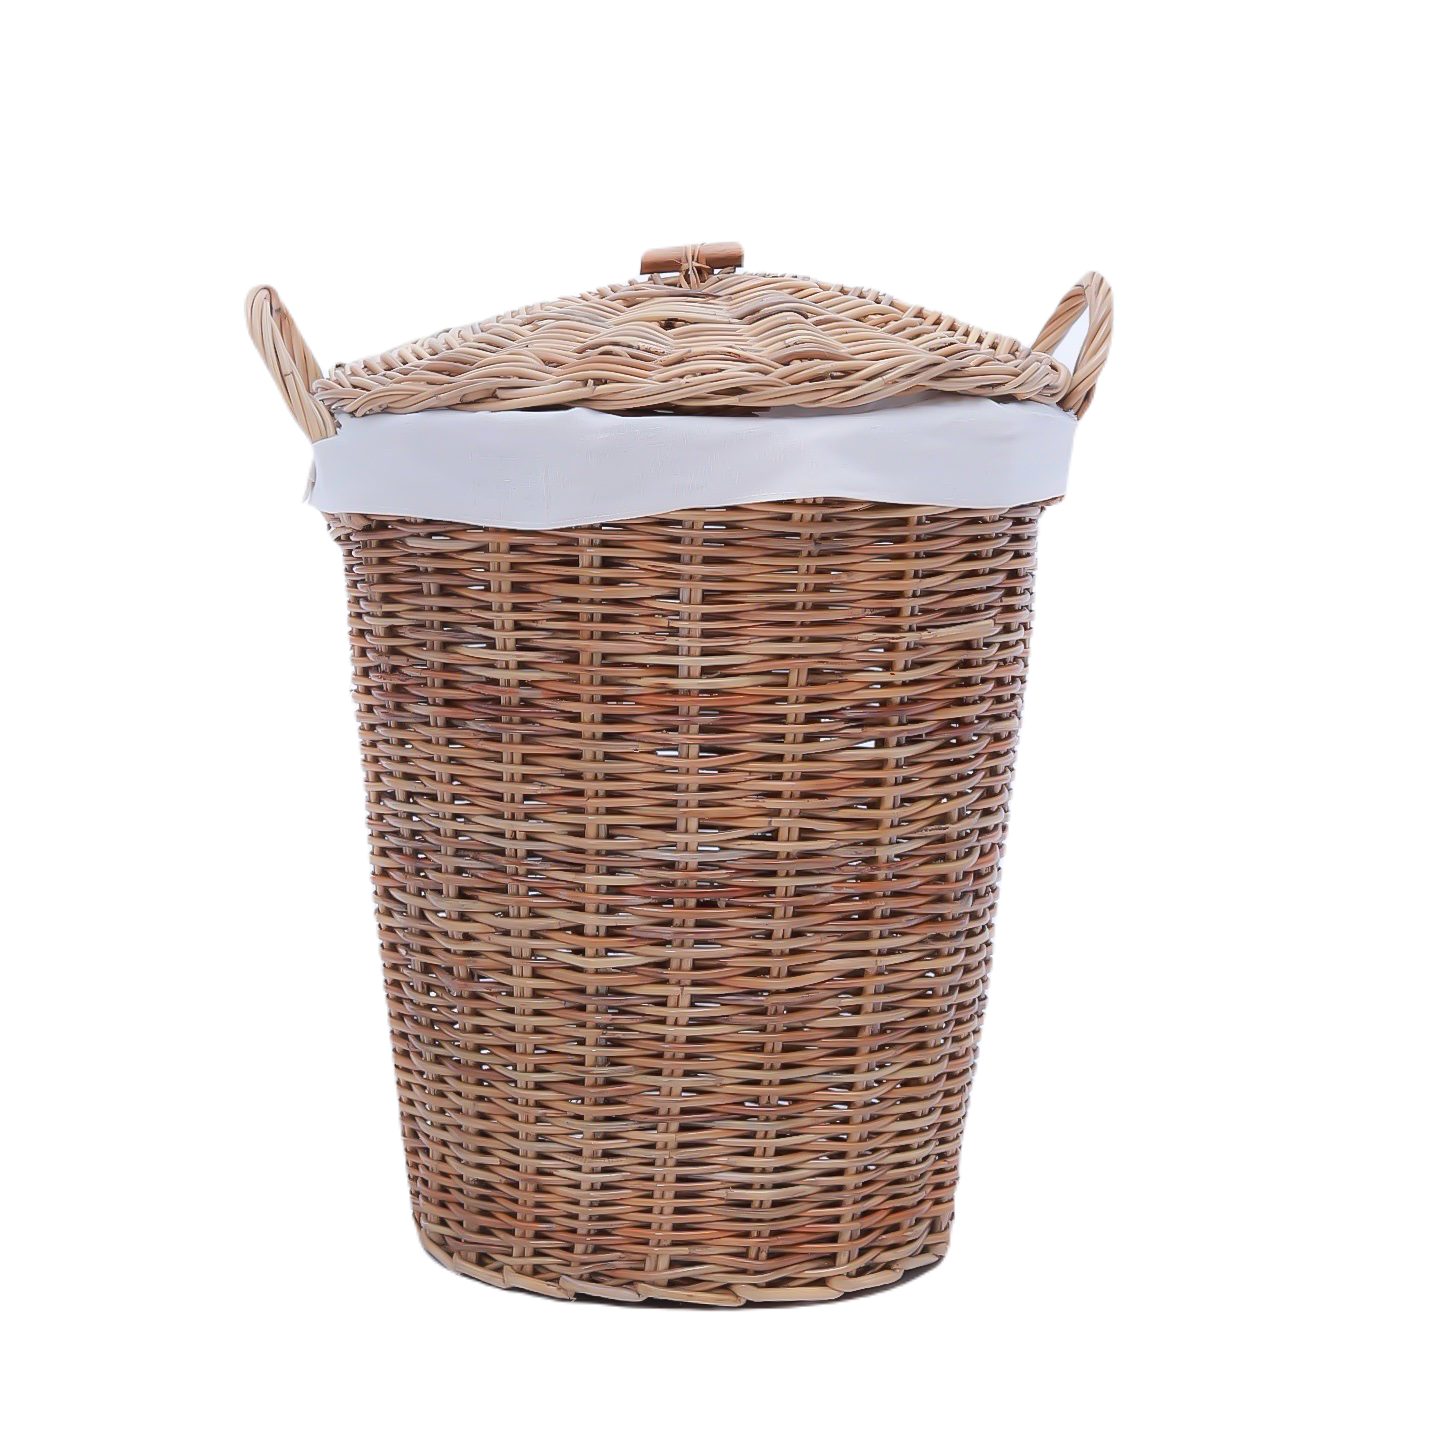 Dirty laundry basket with lid